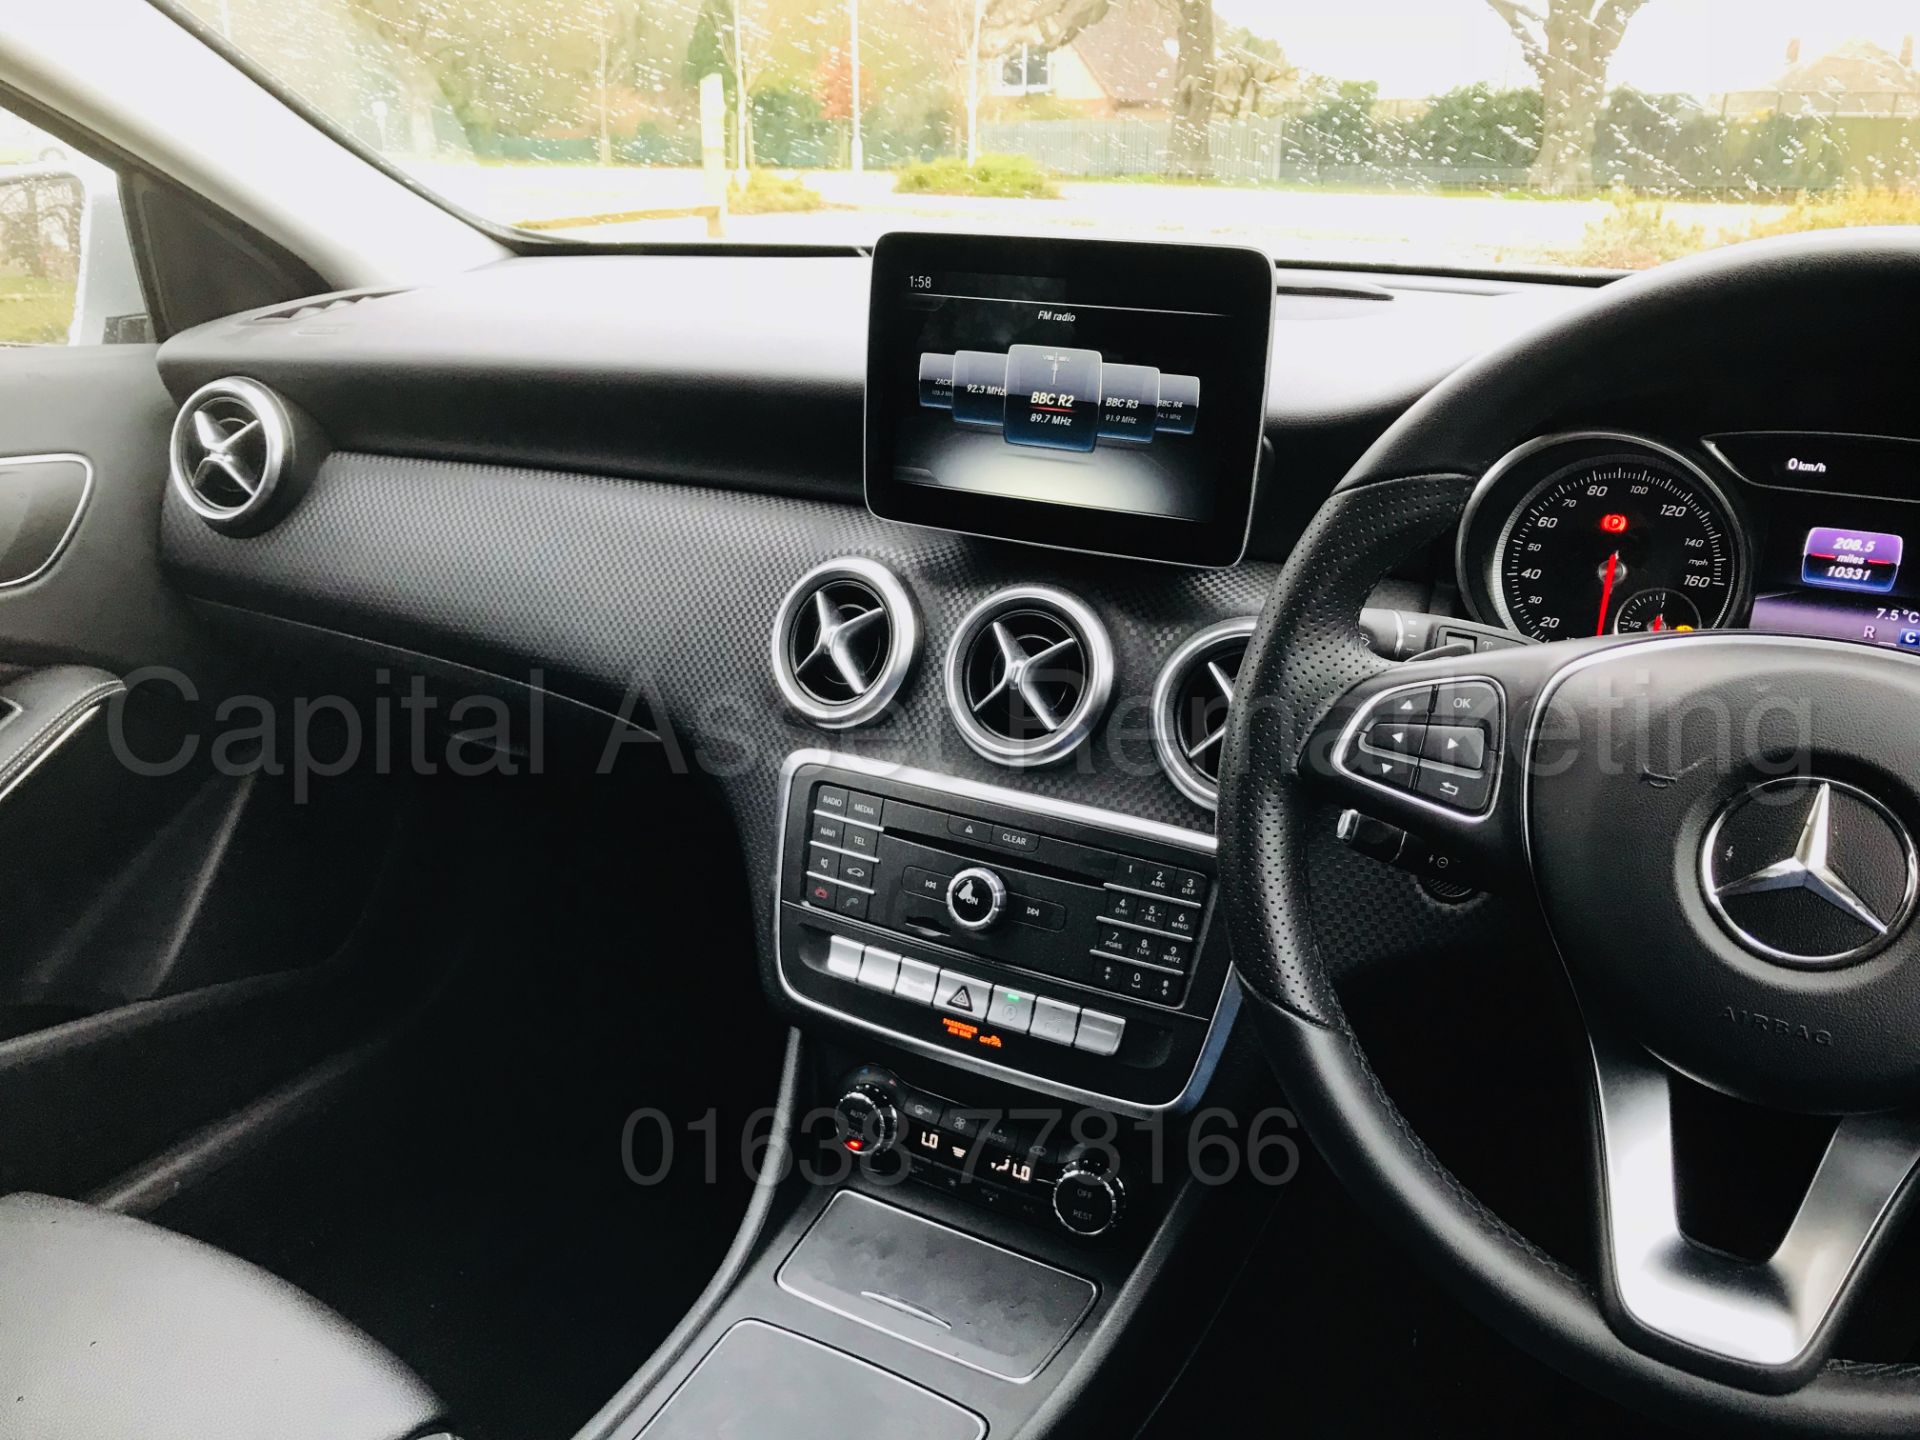 MERCEDES-BENZ A180D 'SPORT' (2017 MODEL) '7G TRONIC AUTO - LEATHER - SAT NAV' (1 OWNER FROM NEW) - Image 30 of 41